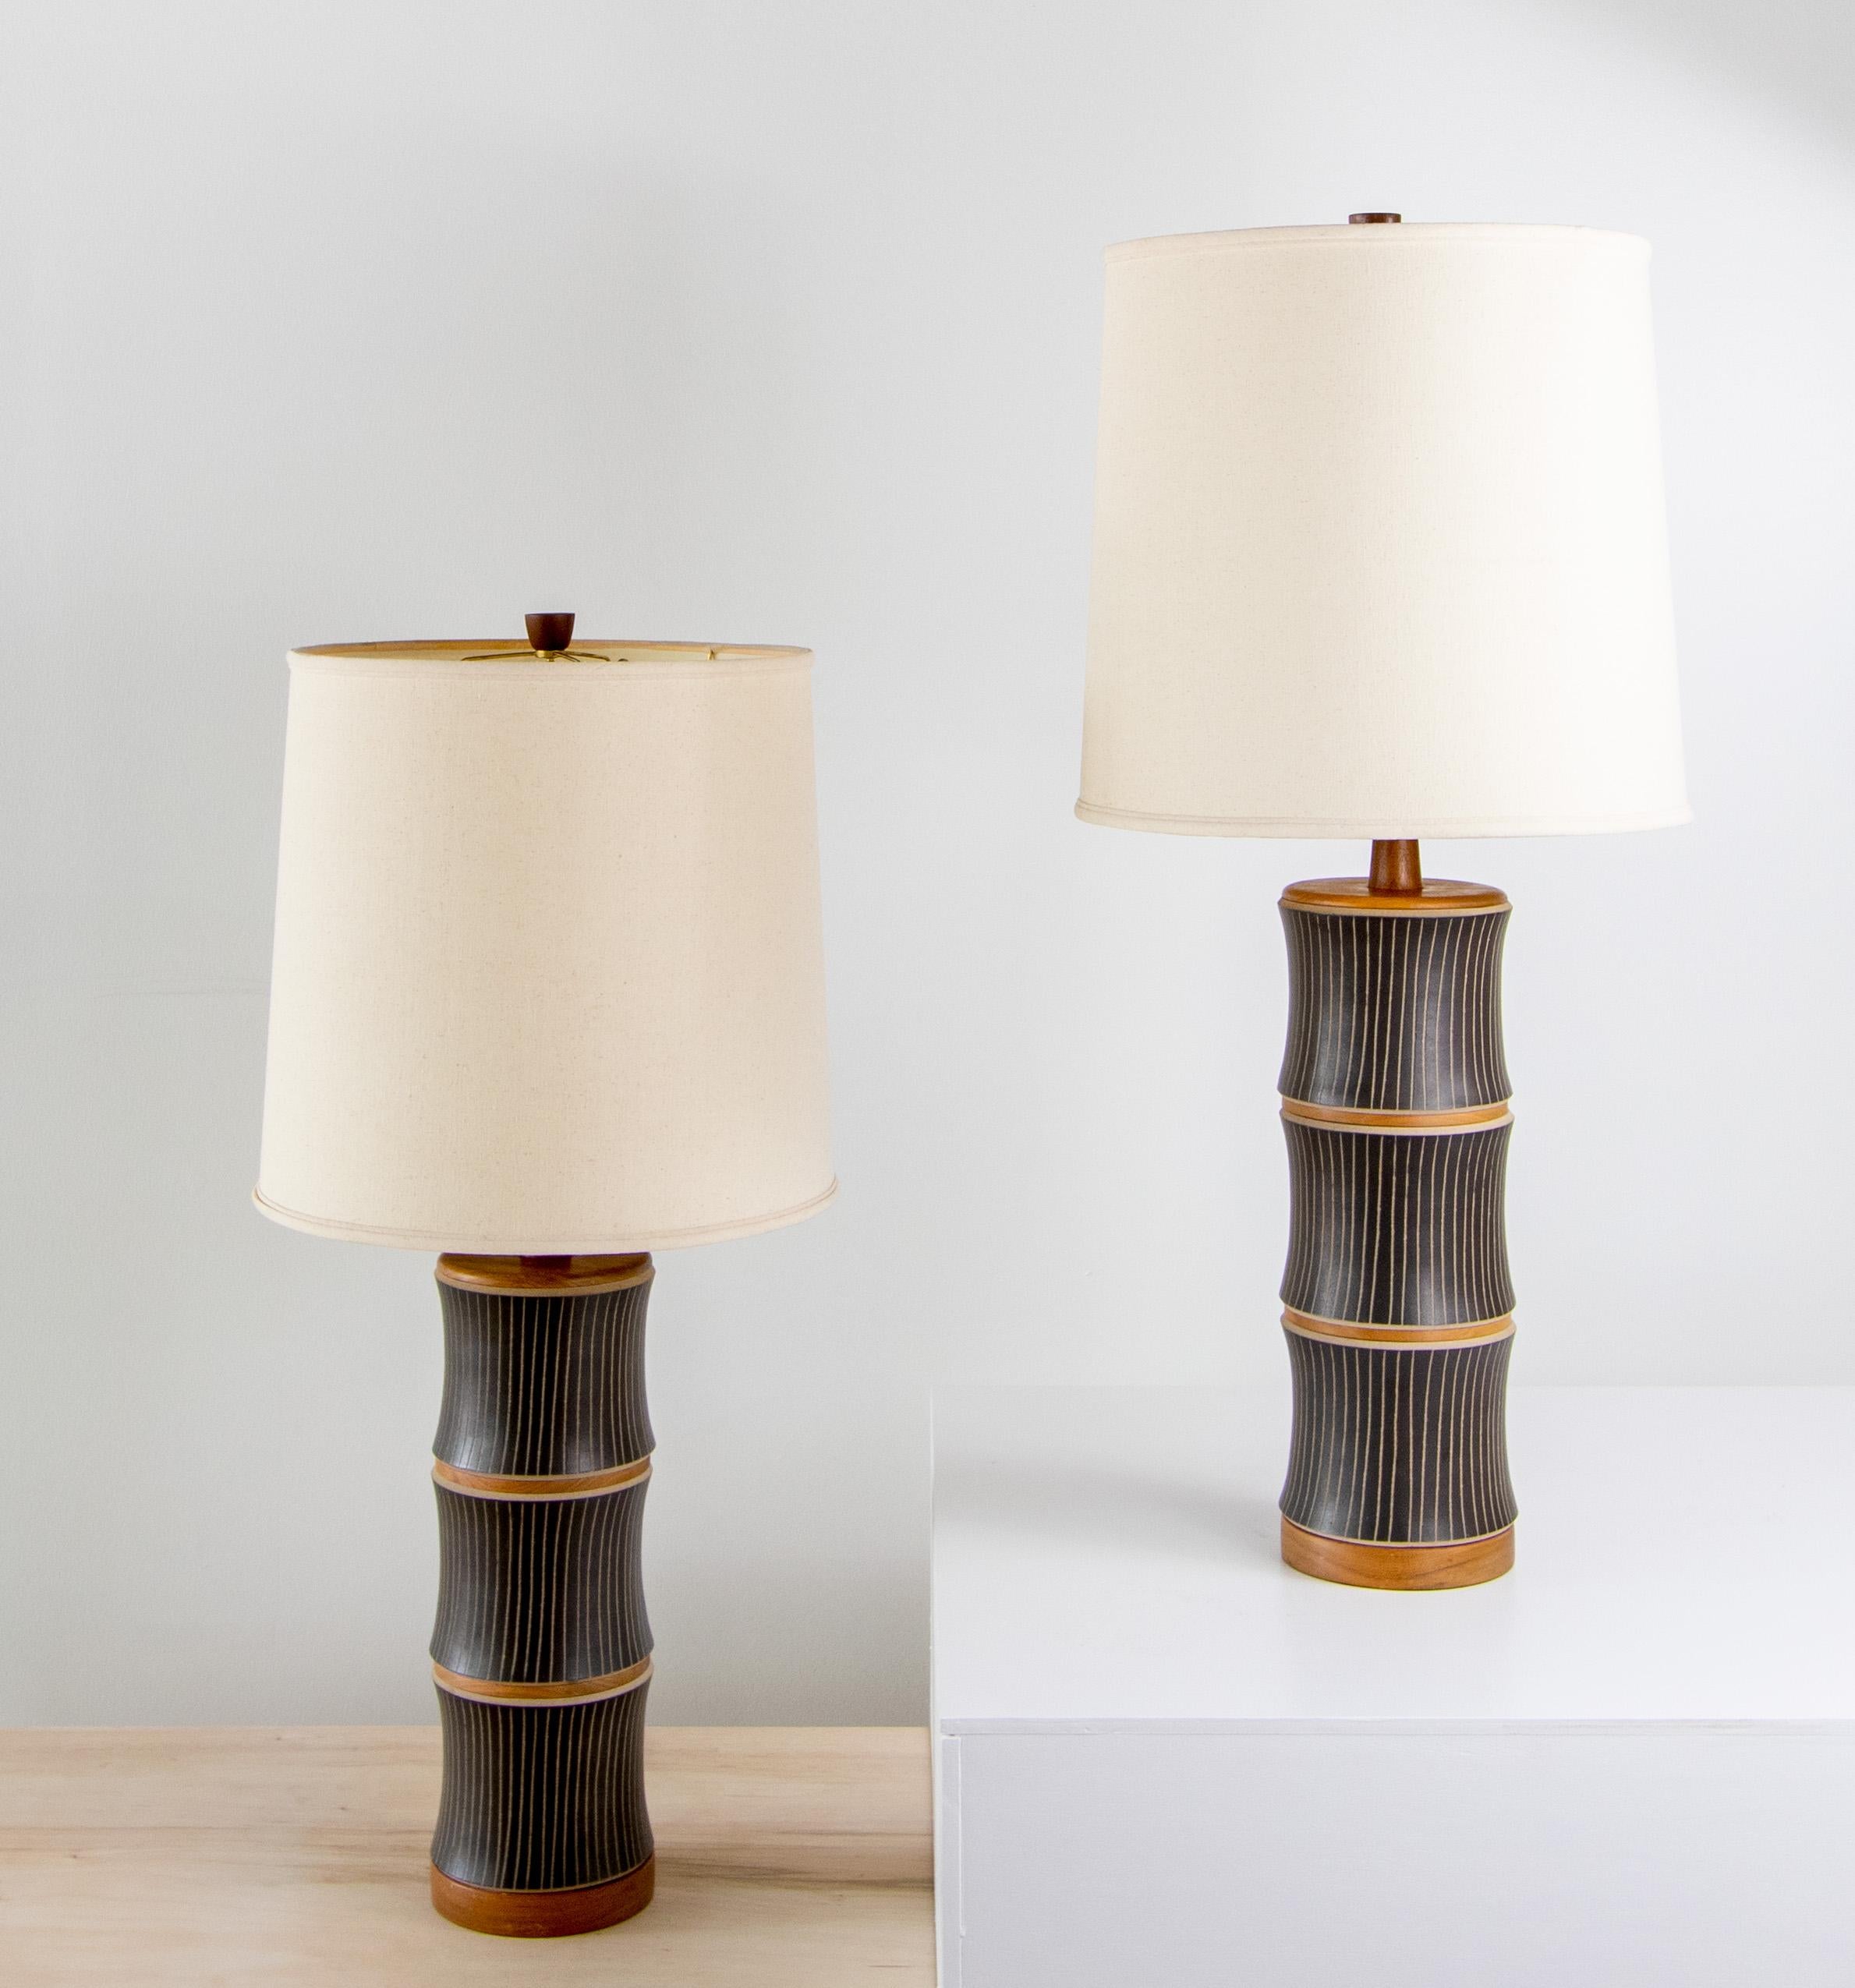 A pair of matte black model M221 lamps designed by Jane and Gordon Martz of Marshall Studios in Veedersburg Indiana. These lamps are highly sought after and are showing up in designs all over the world. Blending sophistication and modern these lamps